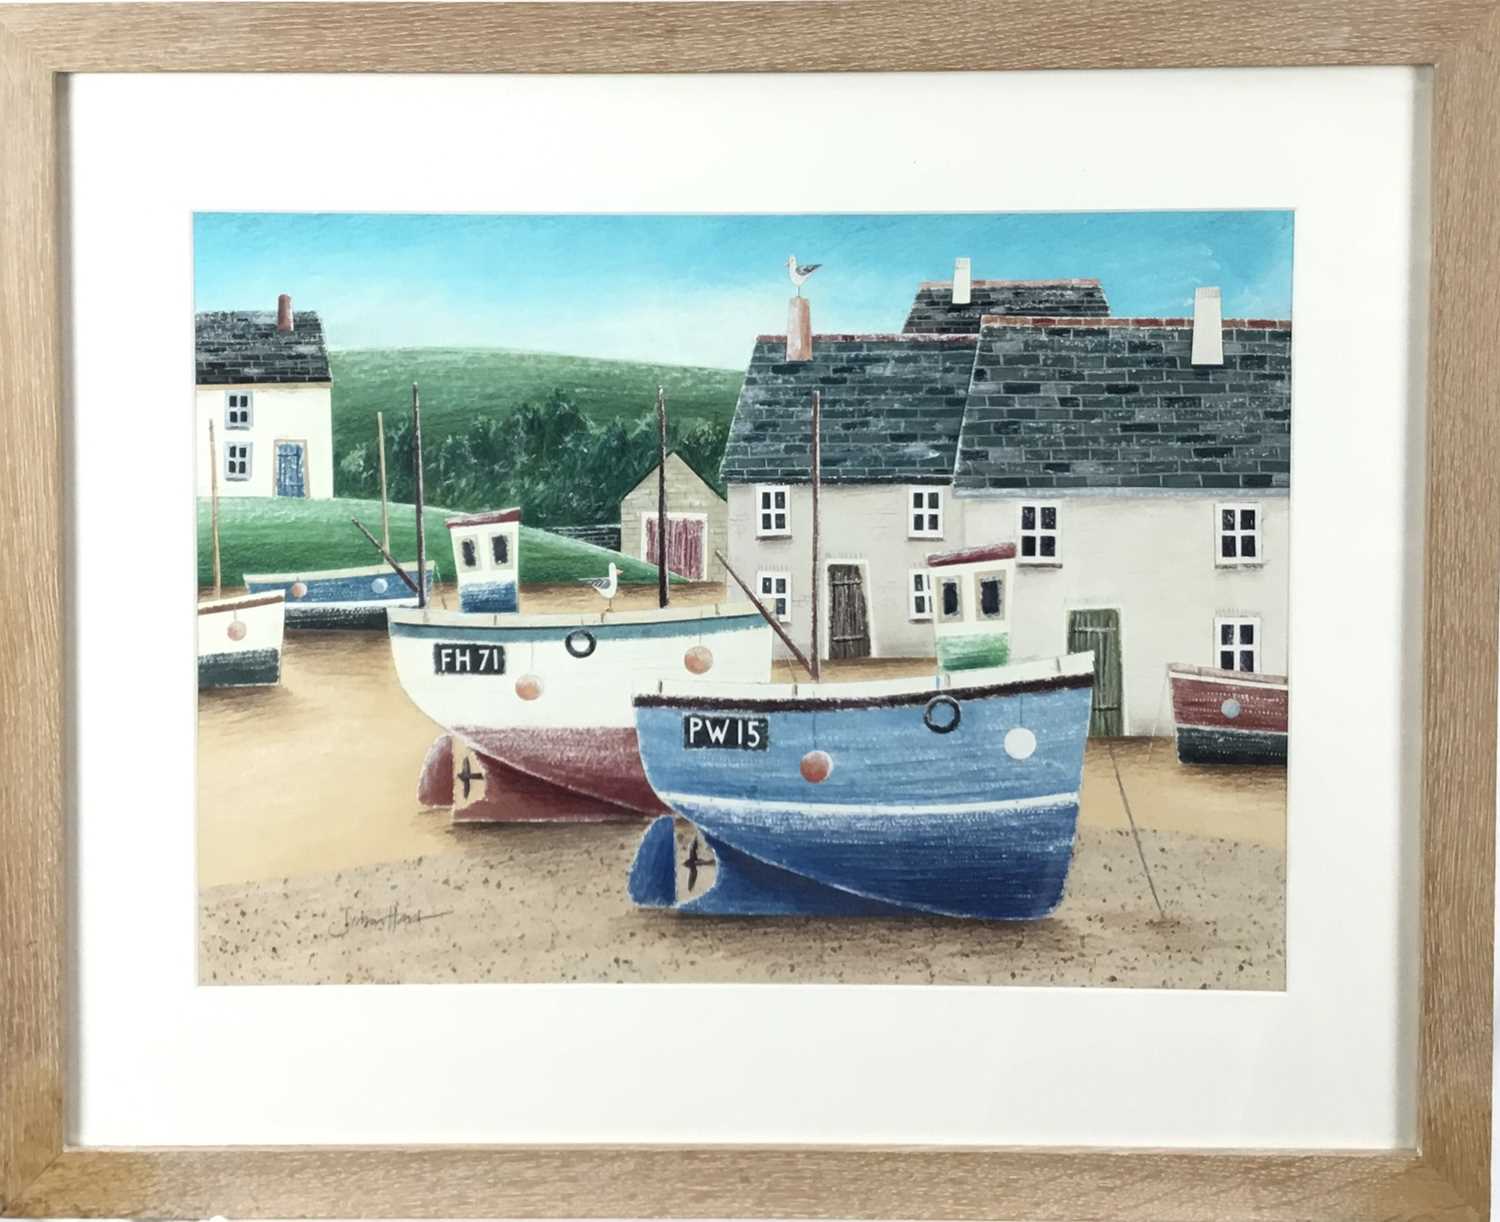 Lot 25 - Simon Hart (b. 1969) mixed media collage - Fisherman’s Cottages, signed, titled verso, 40cm x 55.5cm, mounted in glazed frame